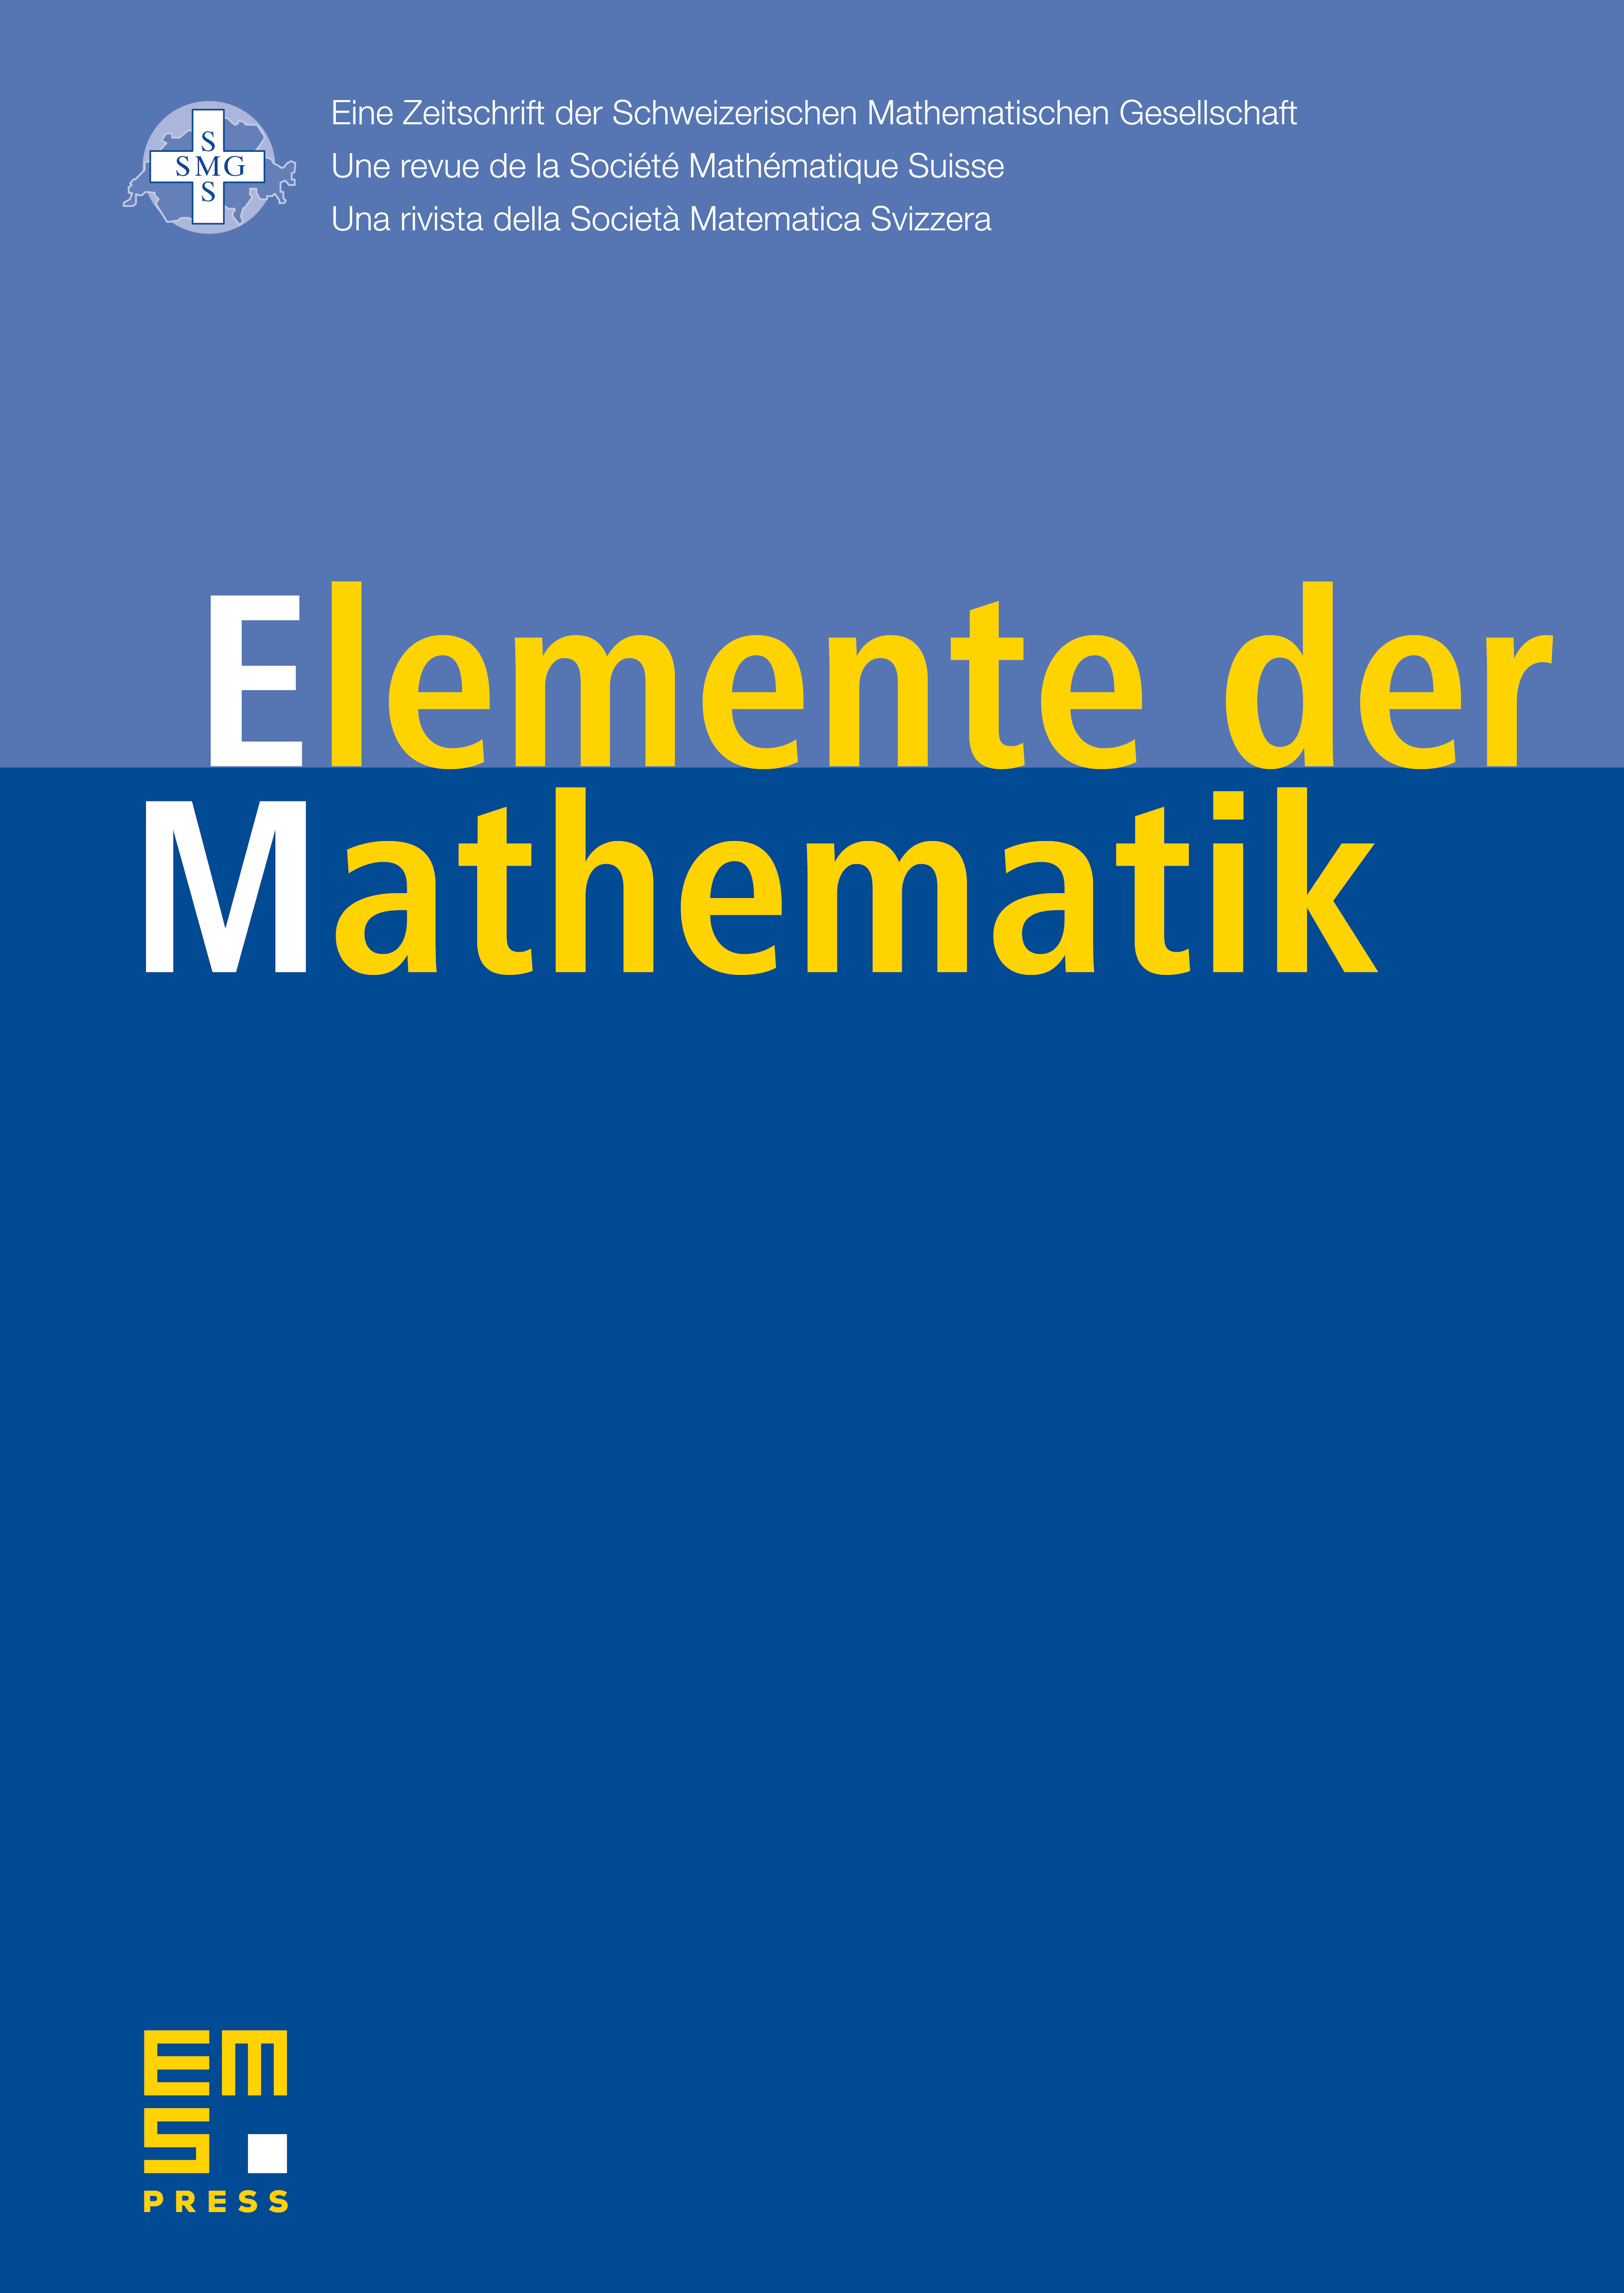 A geometric property of the Möbius transformation cover